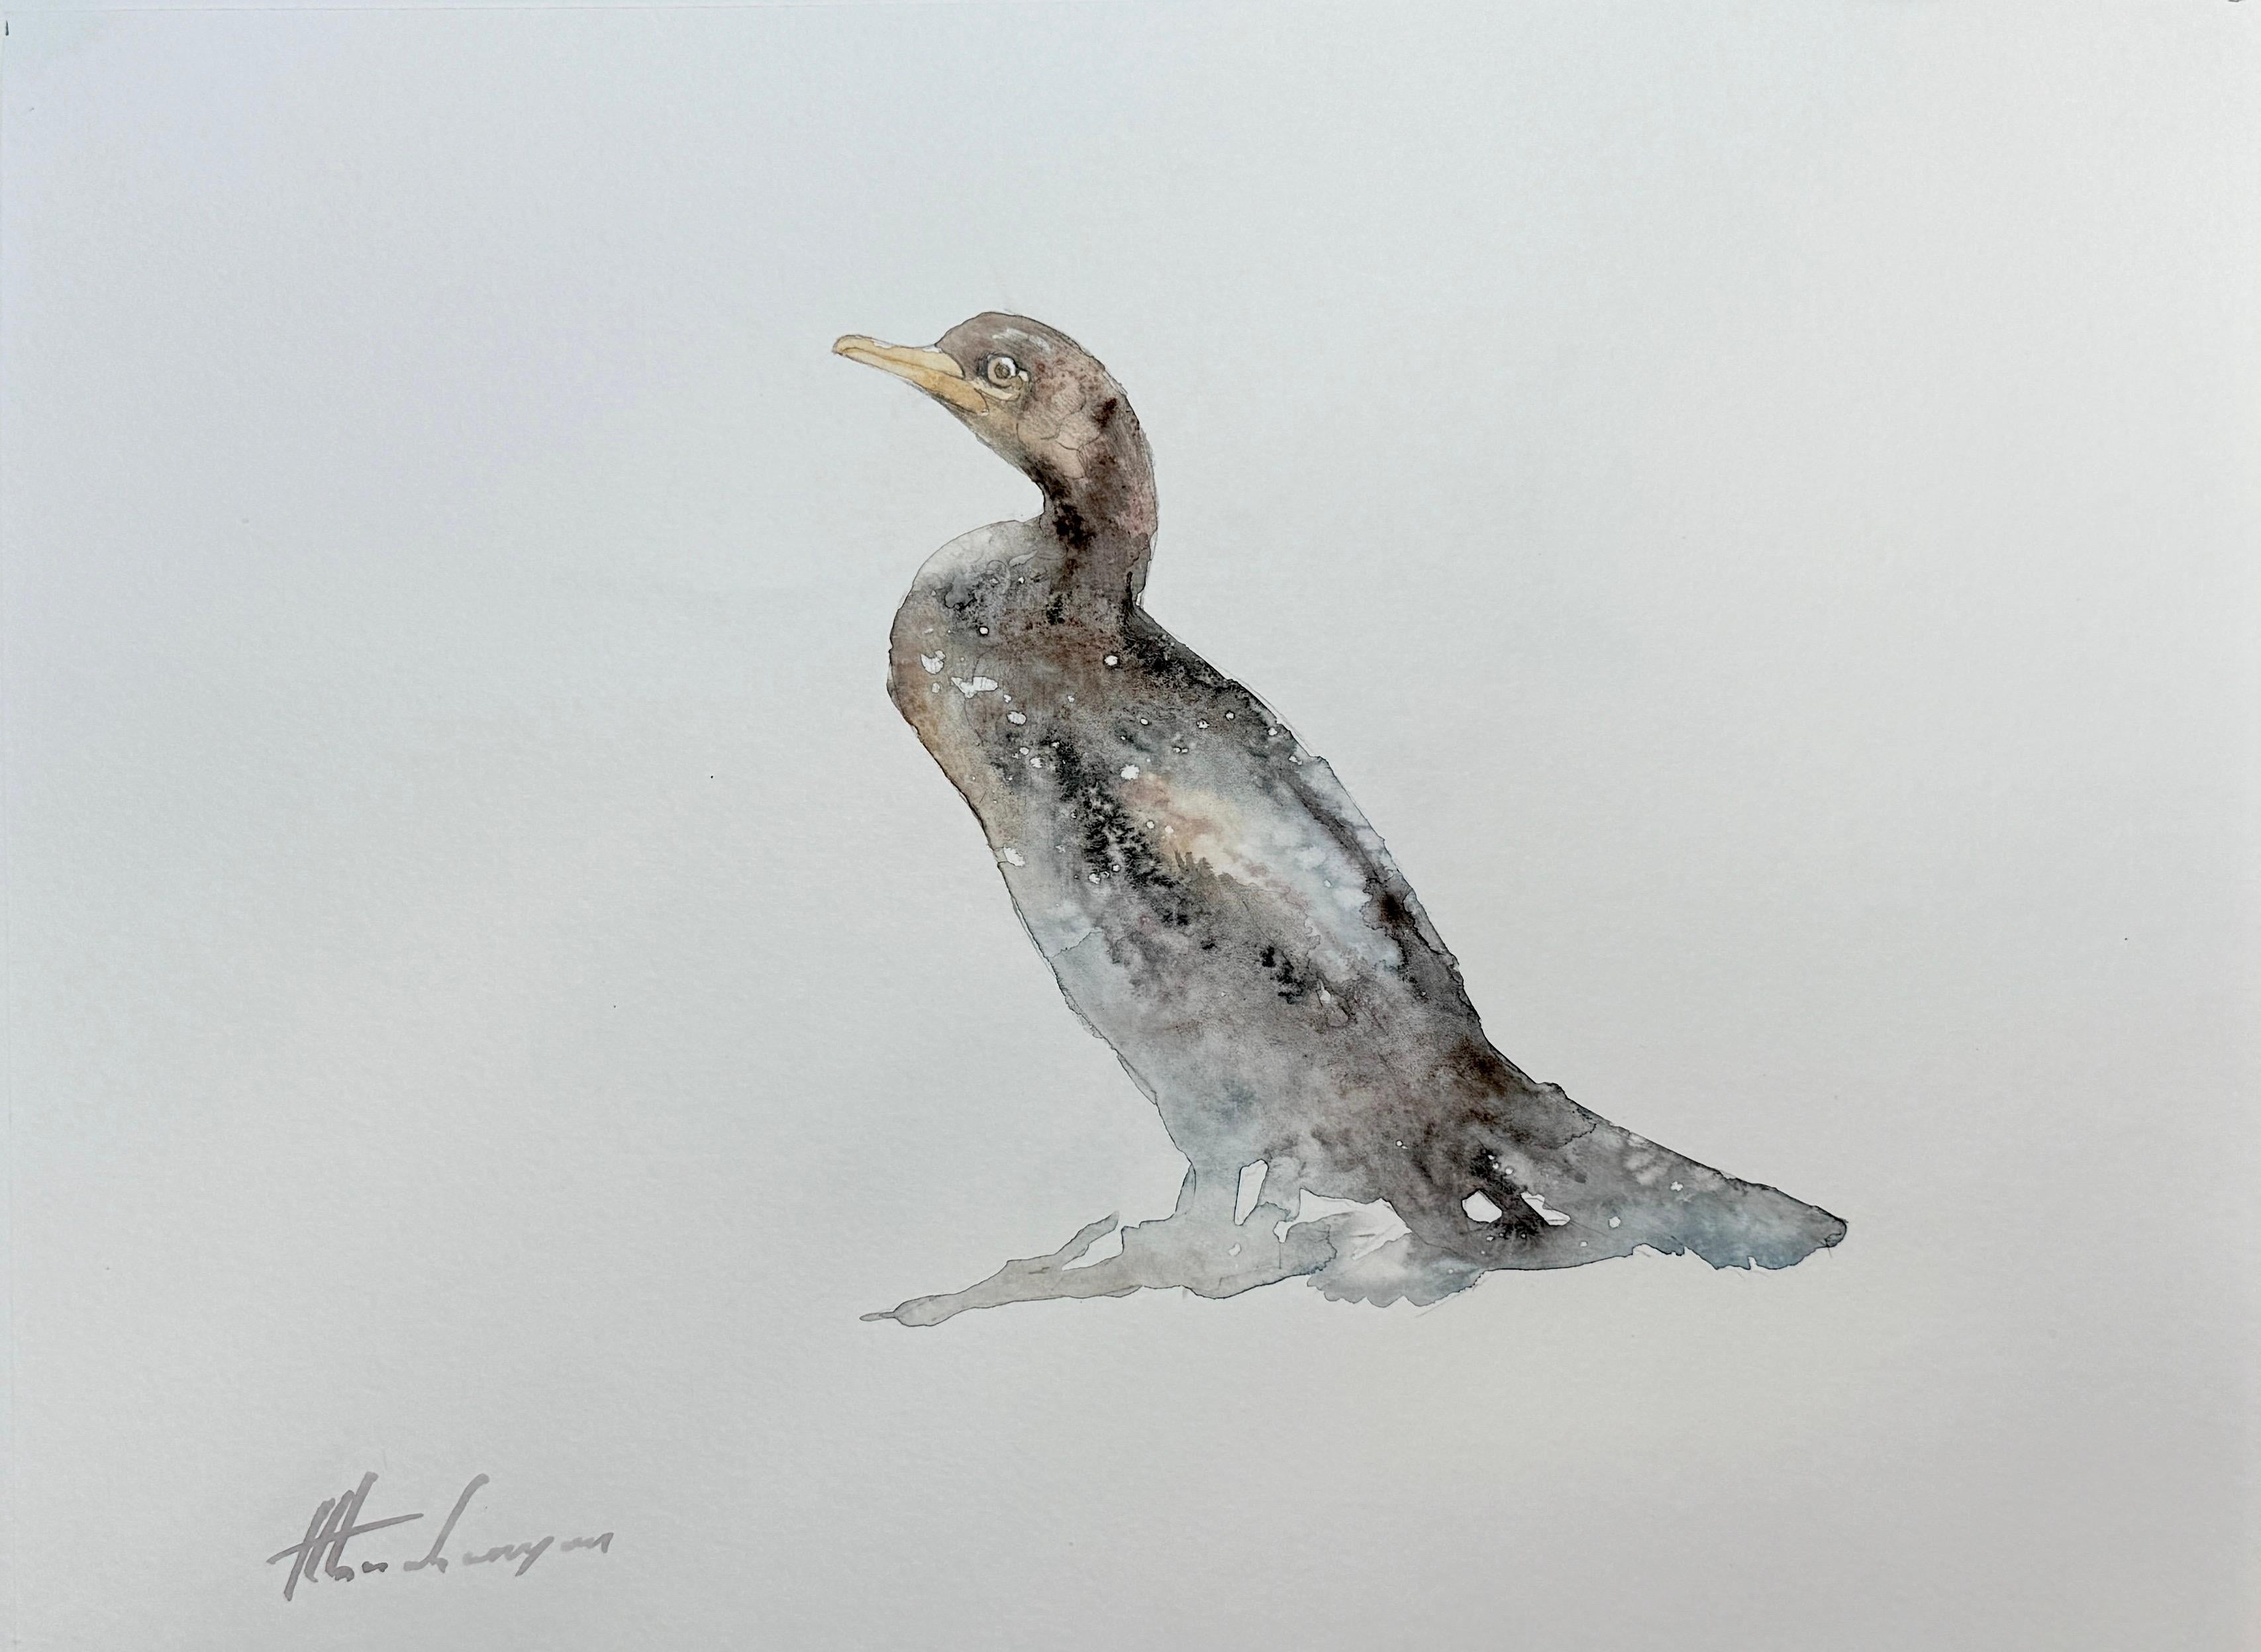 Artyom Abrahamyan Animal Art - Shag, Bird, Watercolor on Paper, Handmade Painting, One of a Kind